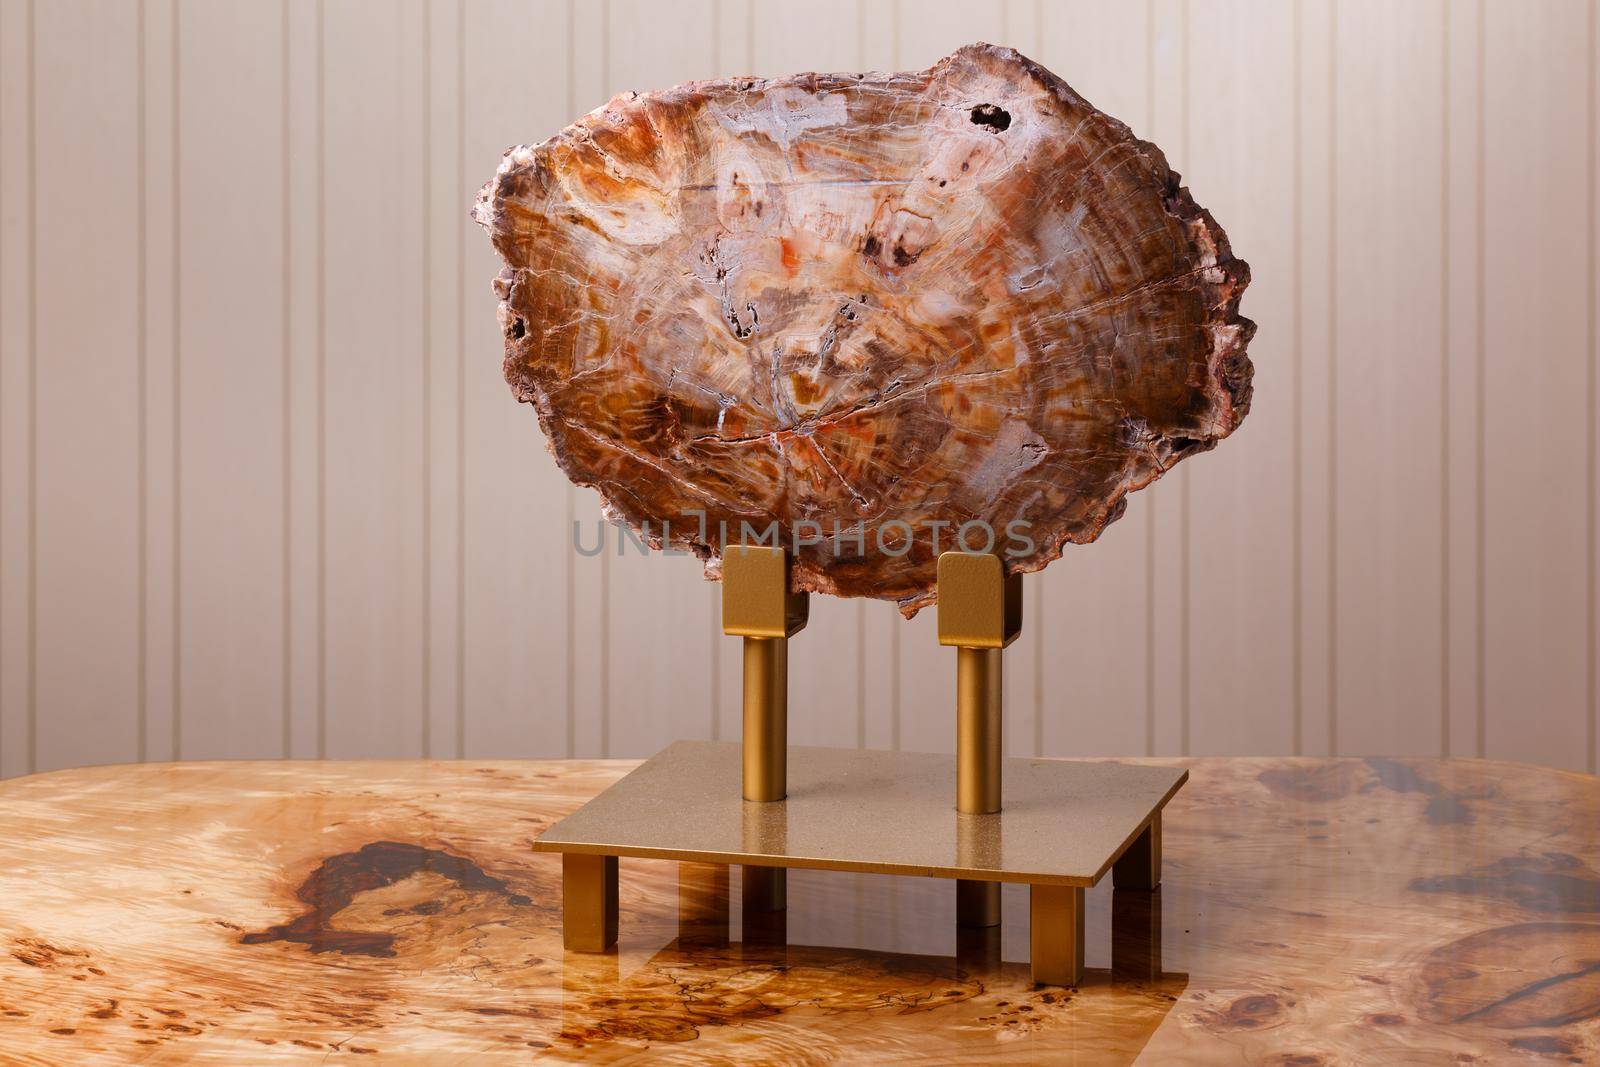 A section of ancient petrified wood, polished and impregnated with epoxy resin, is used to decorate the interior of a home or office.